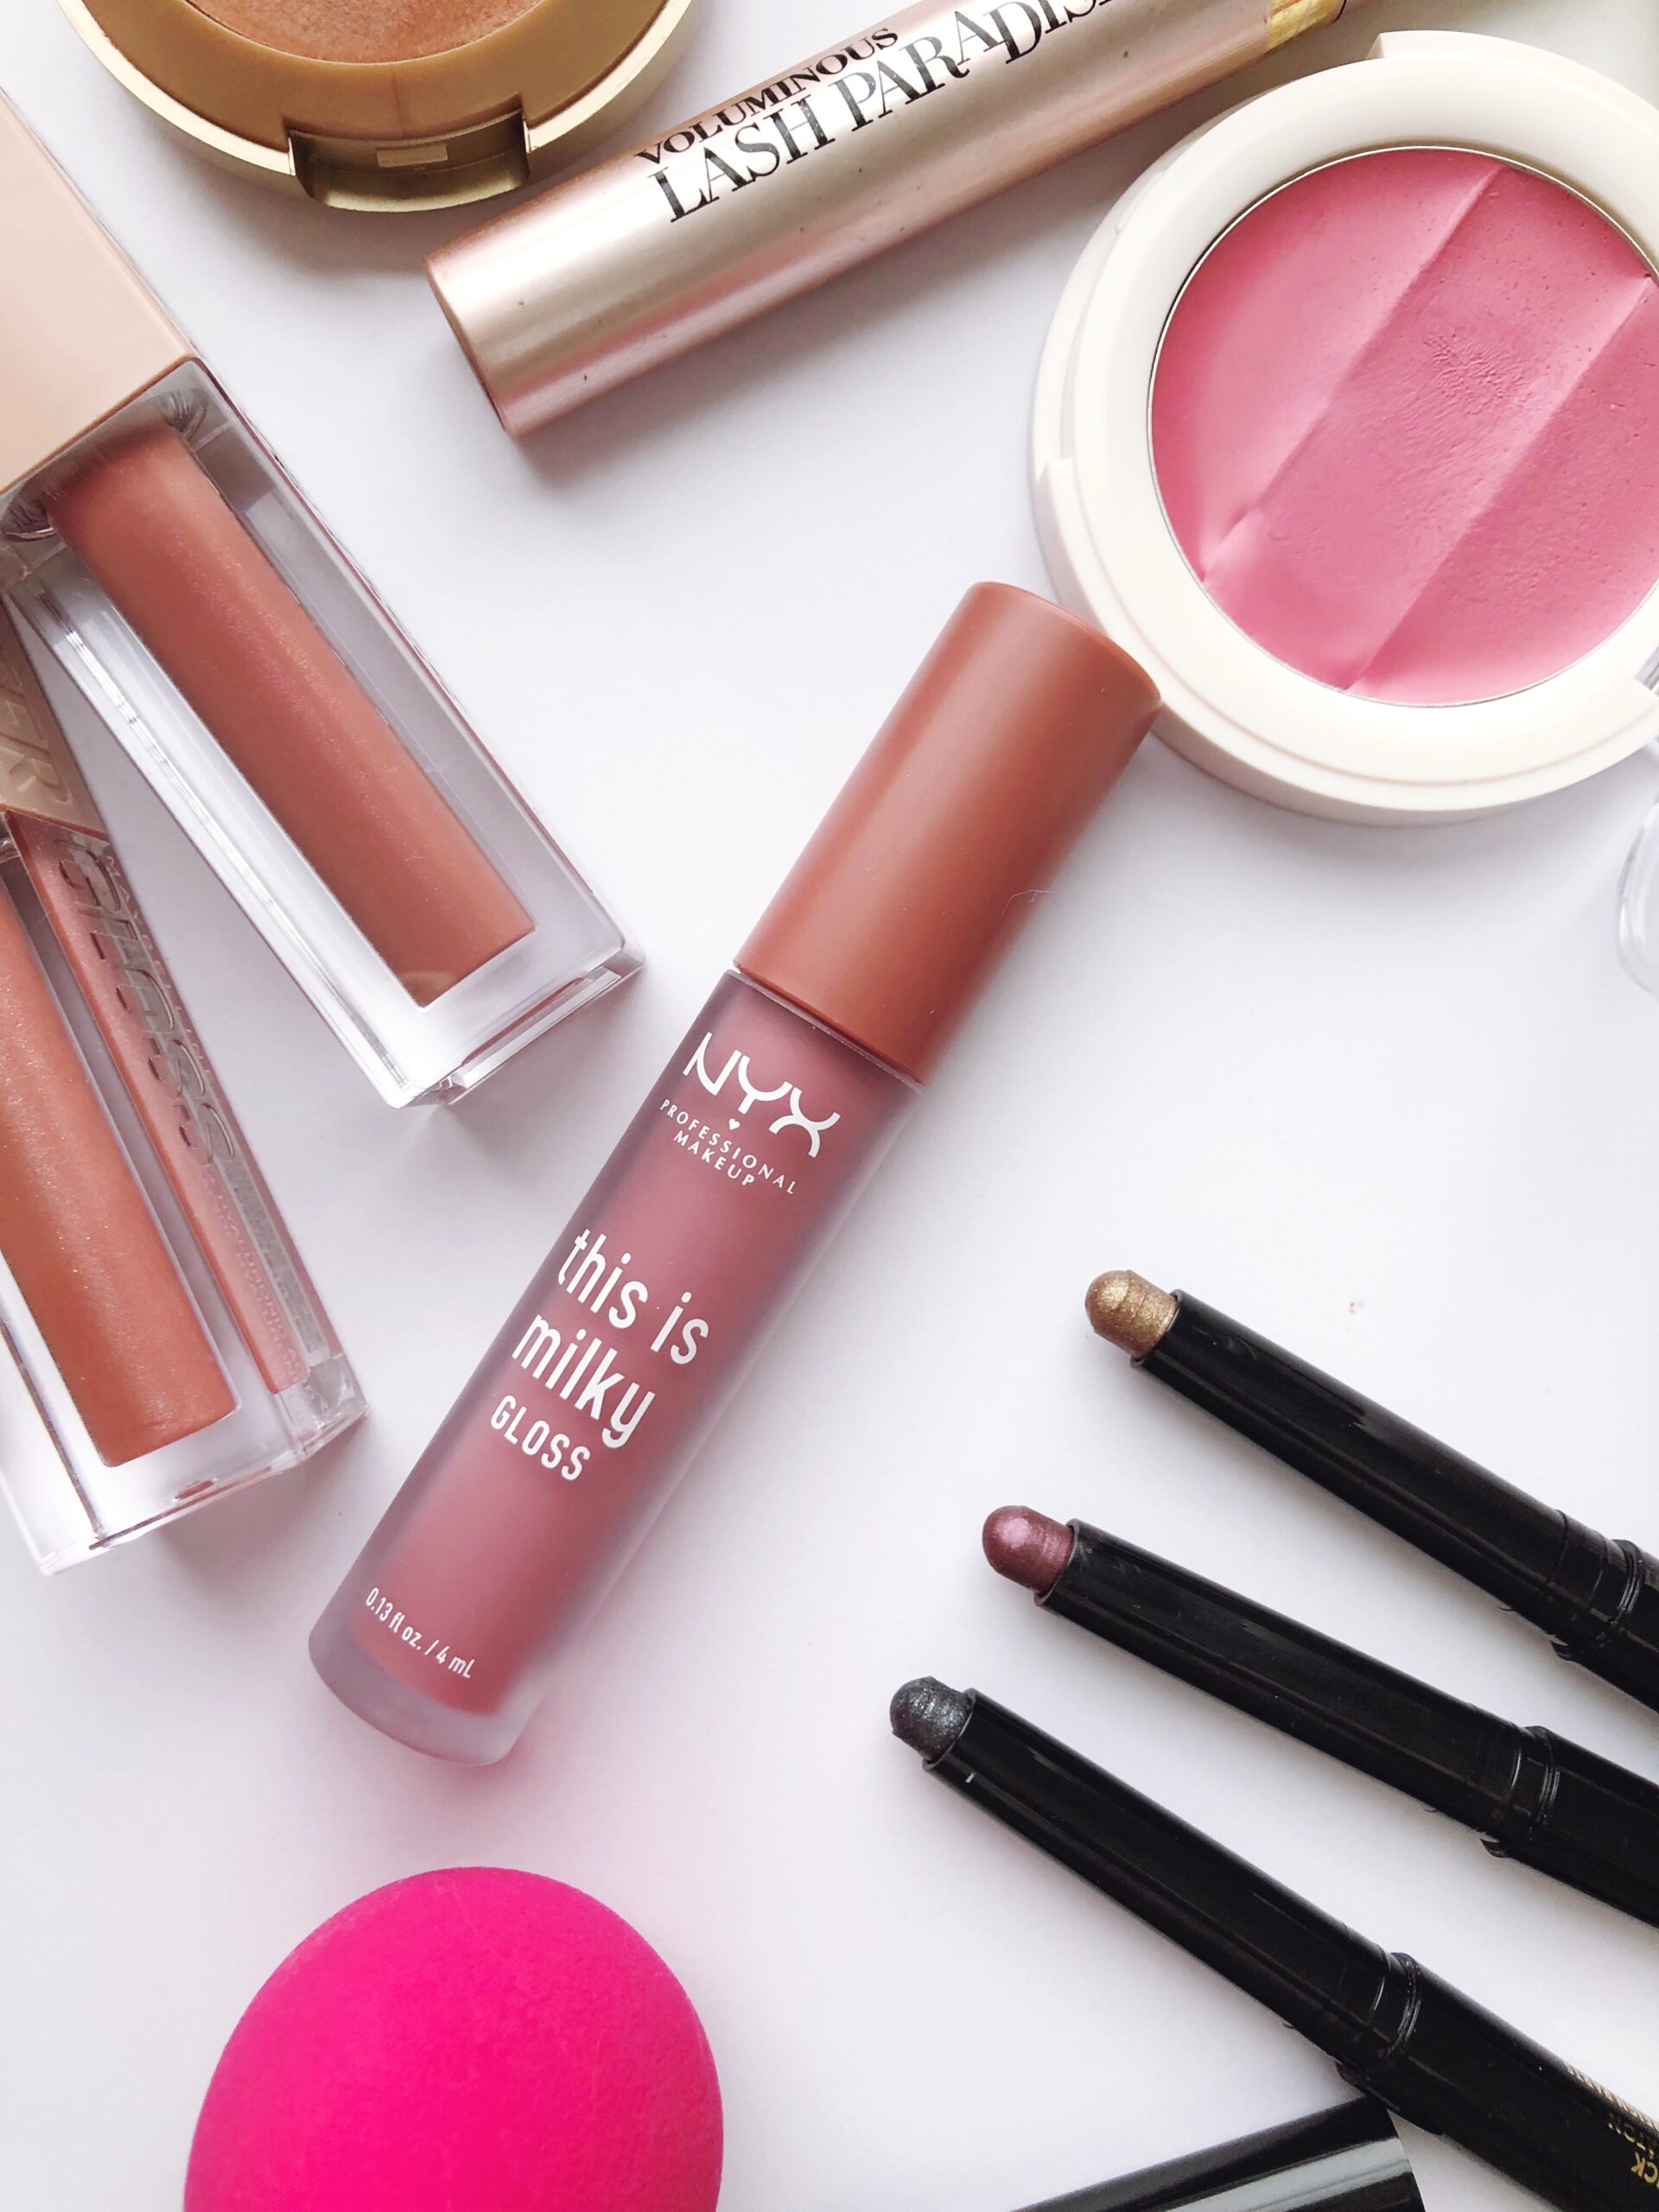 10 Best Drugstore Makeup Products - The Beauty